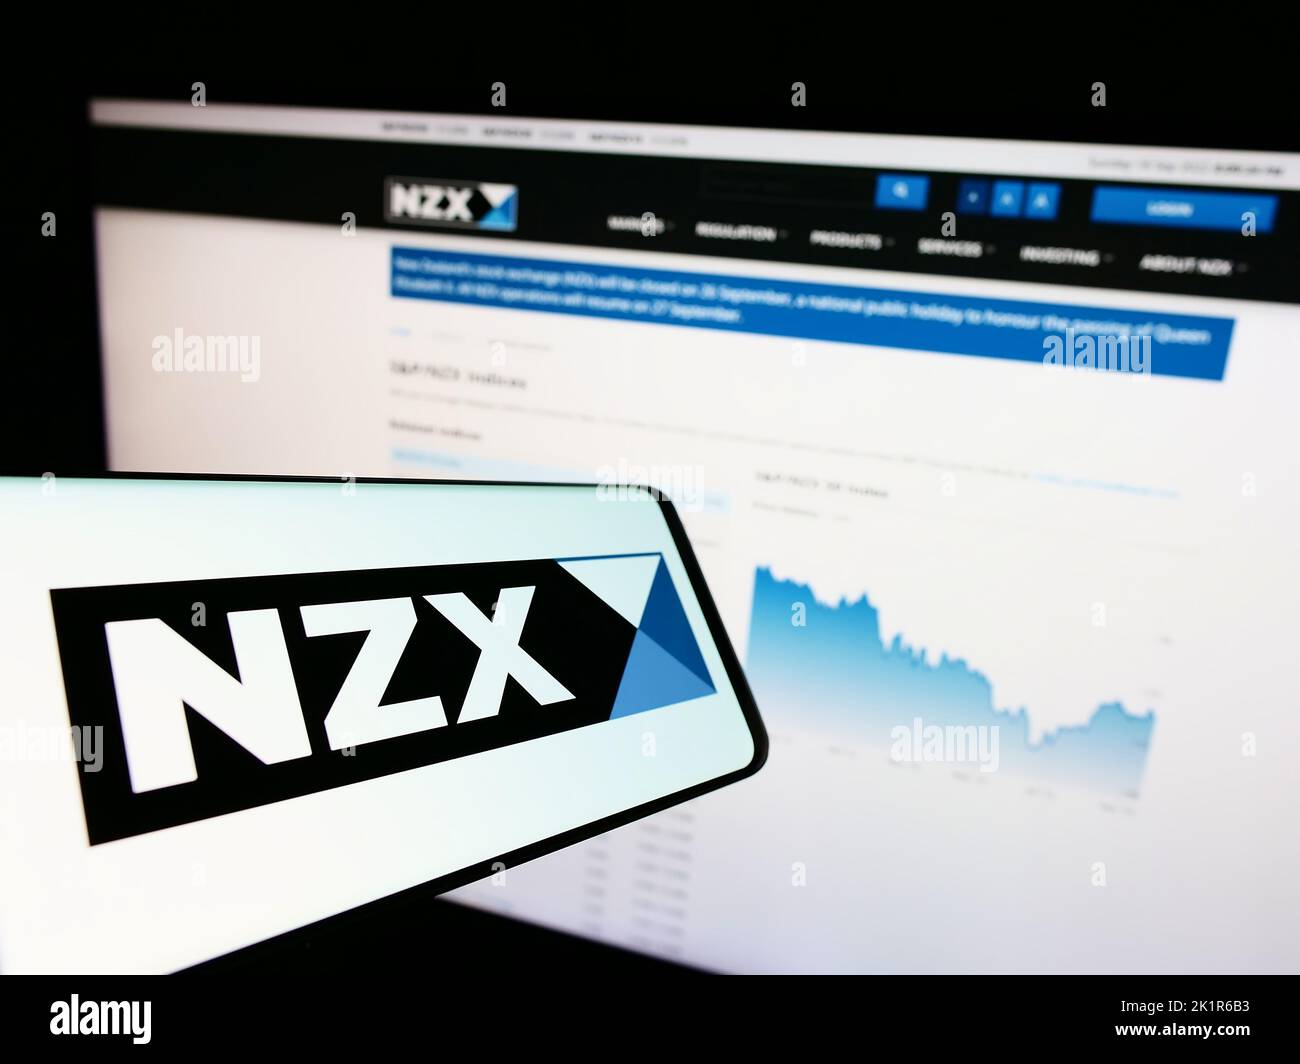 Mobile phone with logo of financial company New Zealand's Exchange (NZX) on screen in front of website. Focus on center-right of phone display. Stock Photo